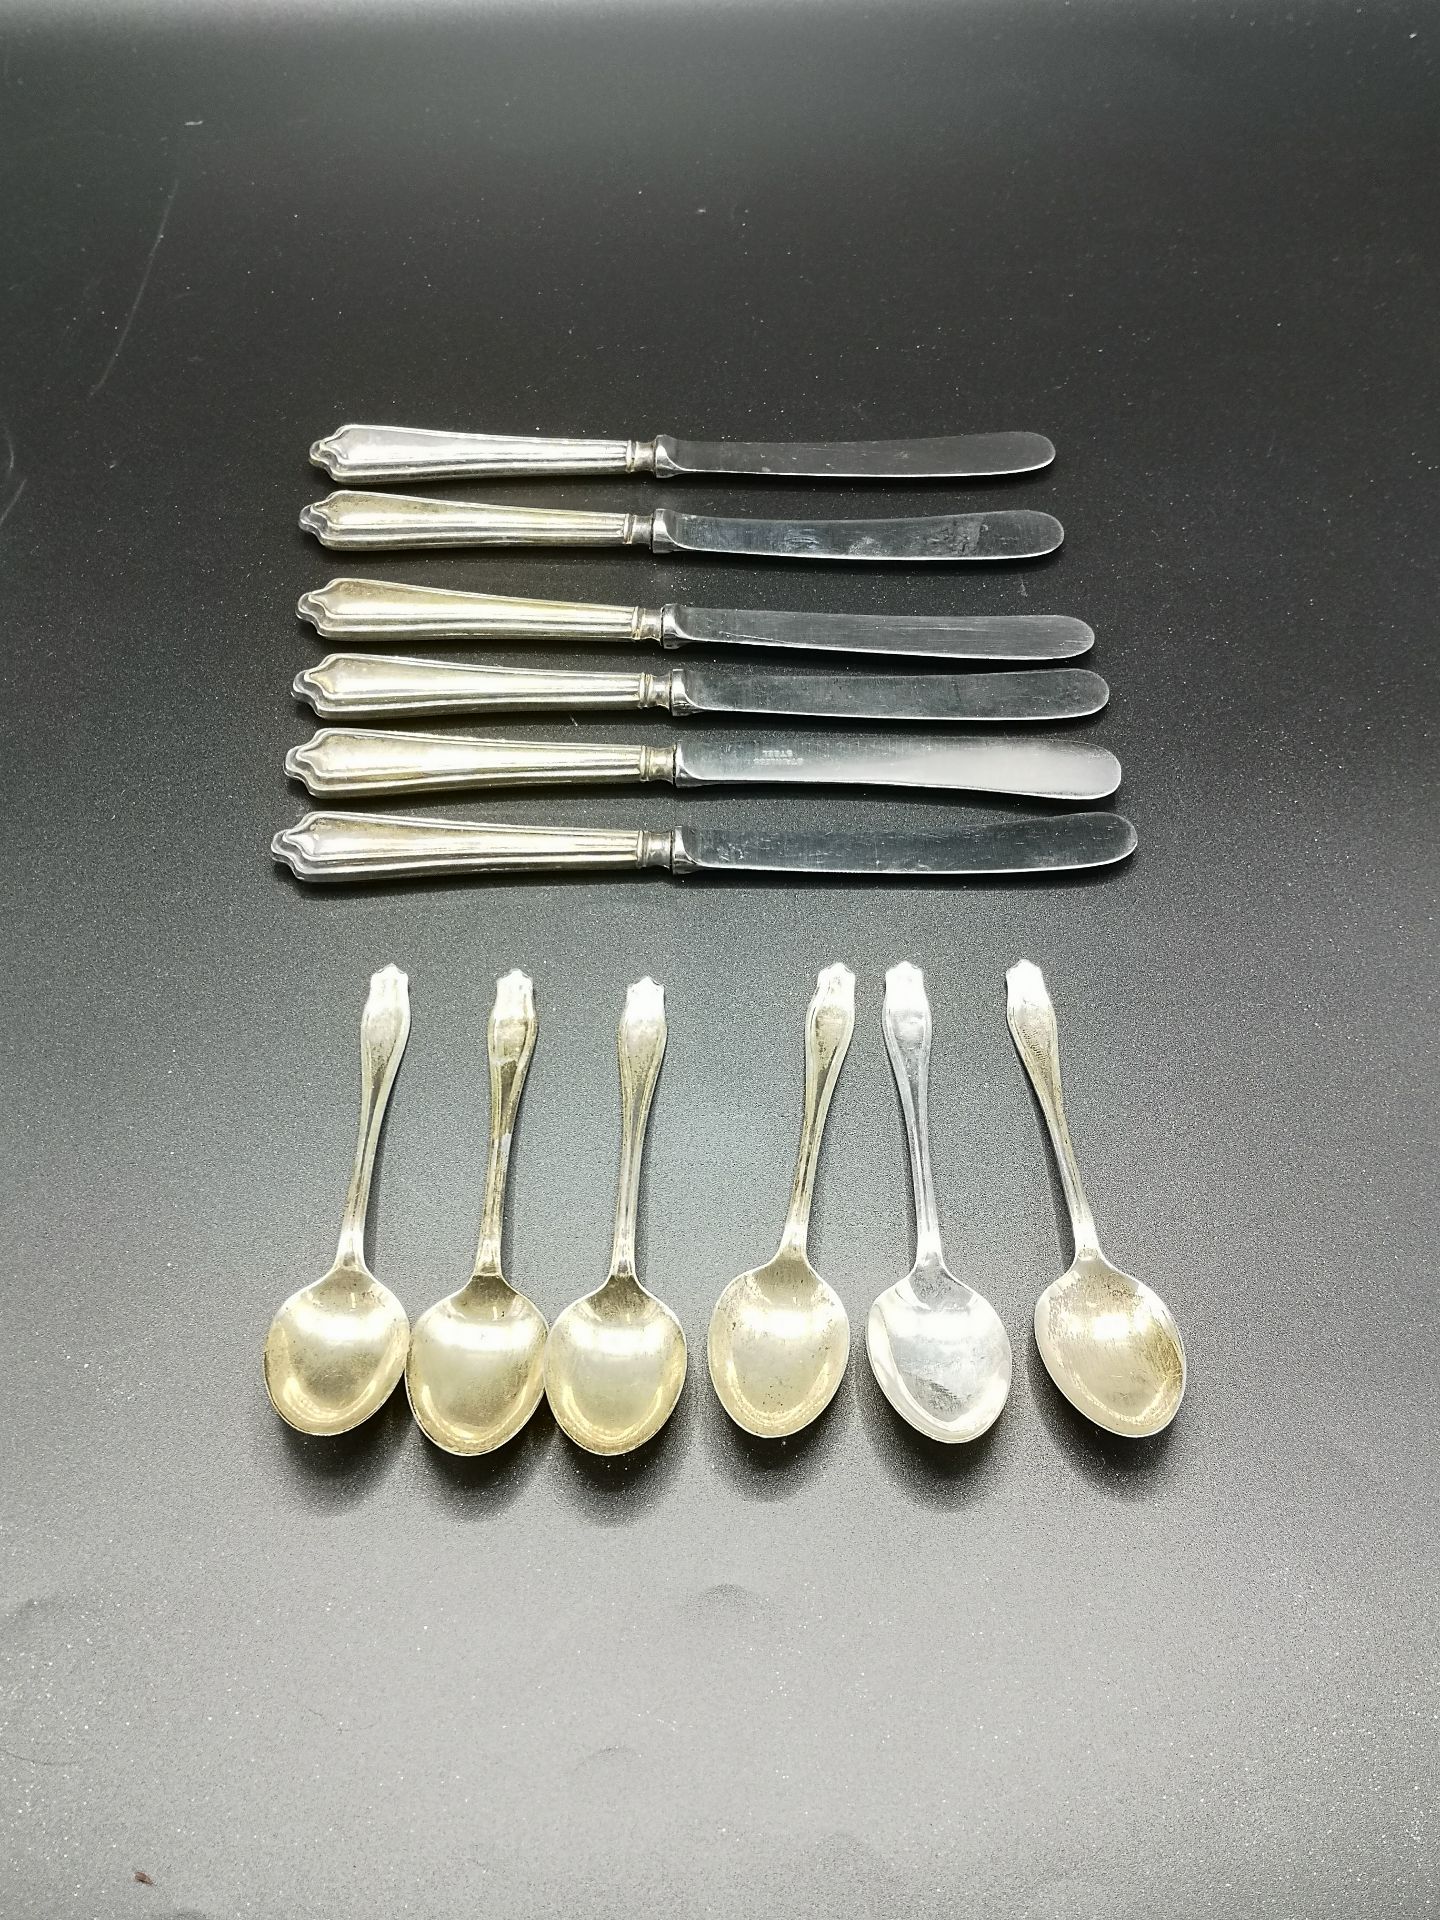 Six silver tea spoons together with six silver handled knives